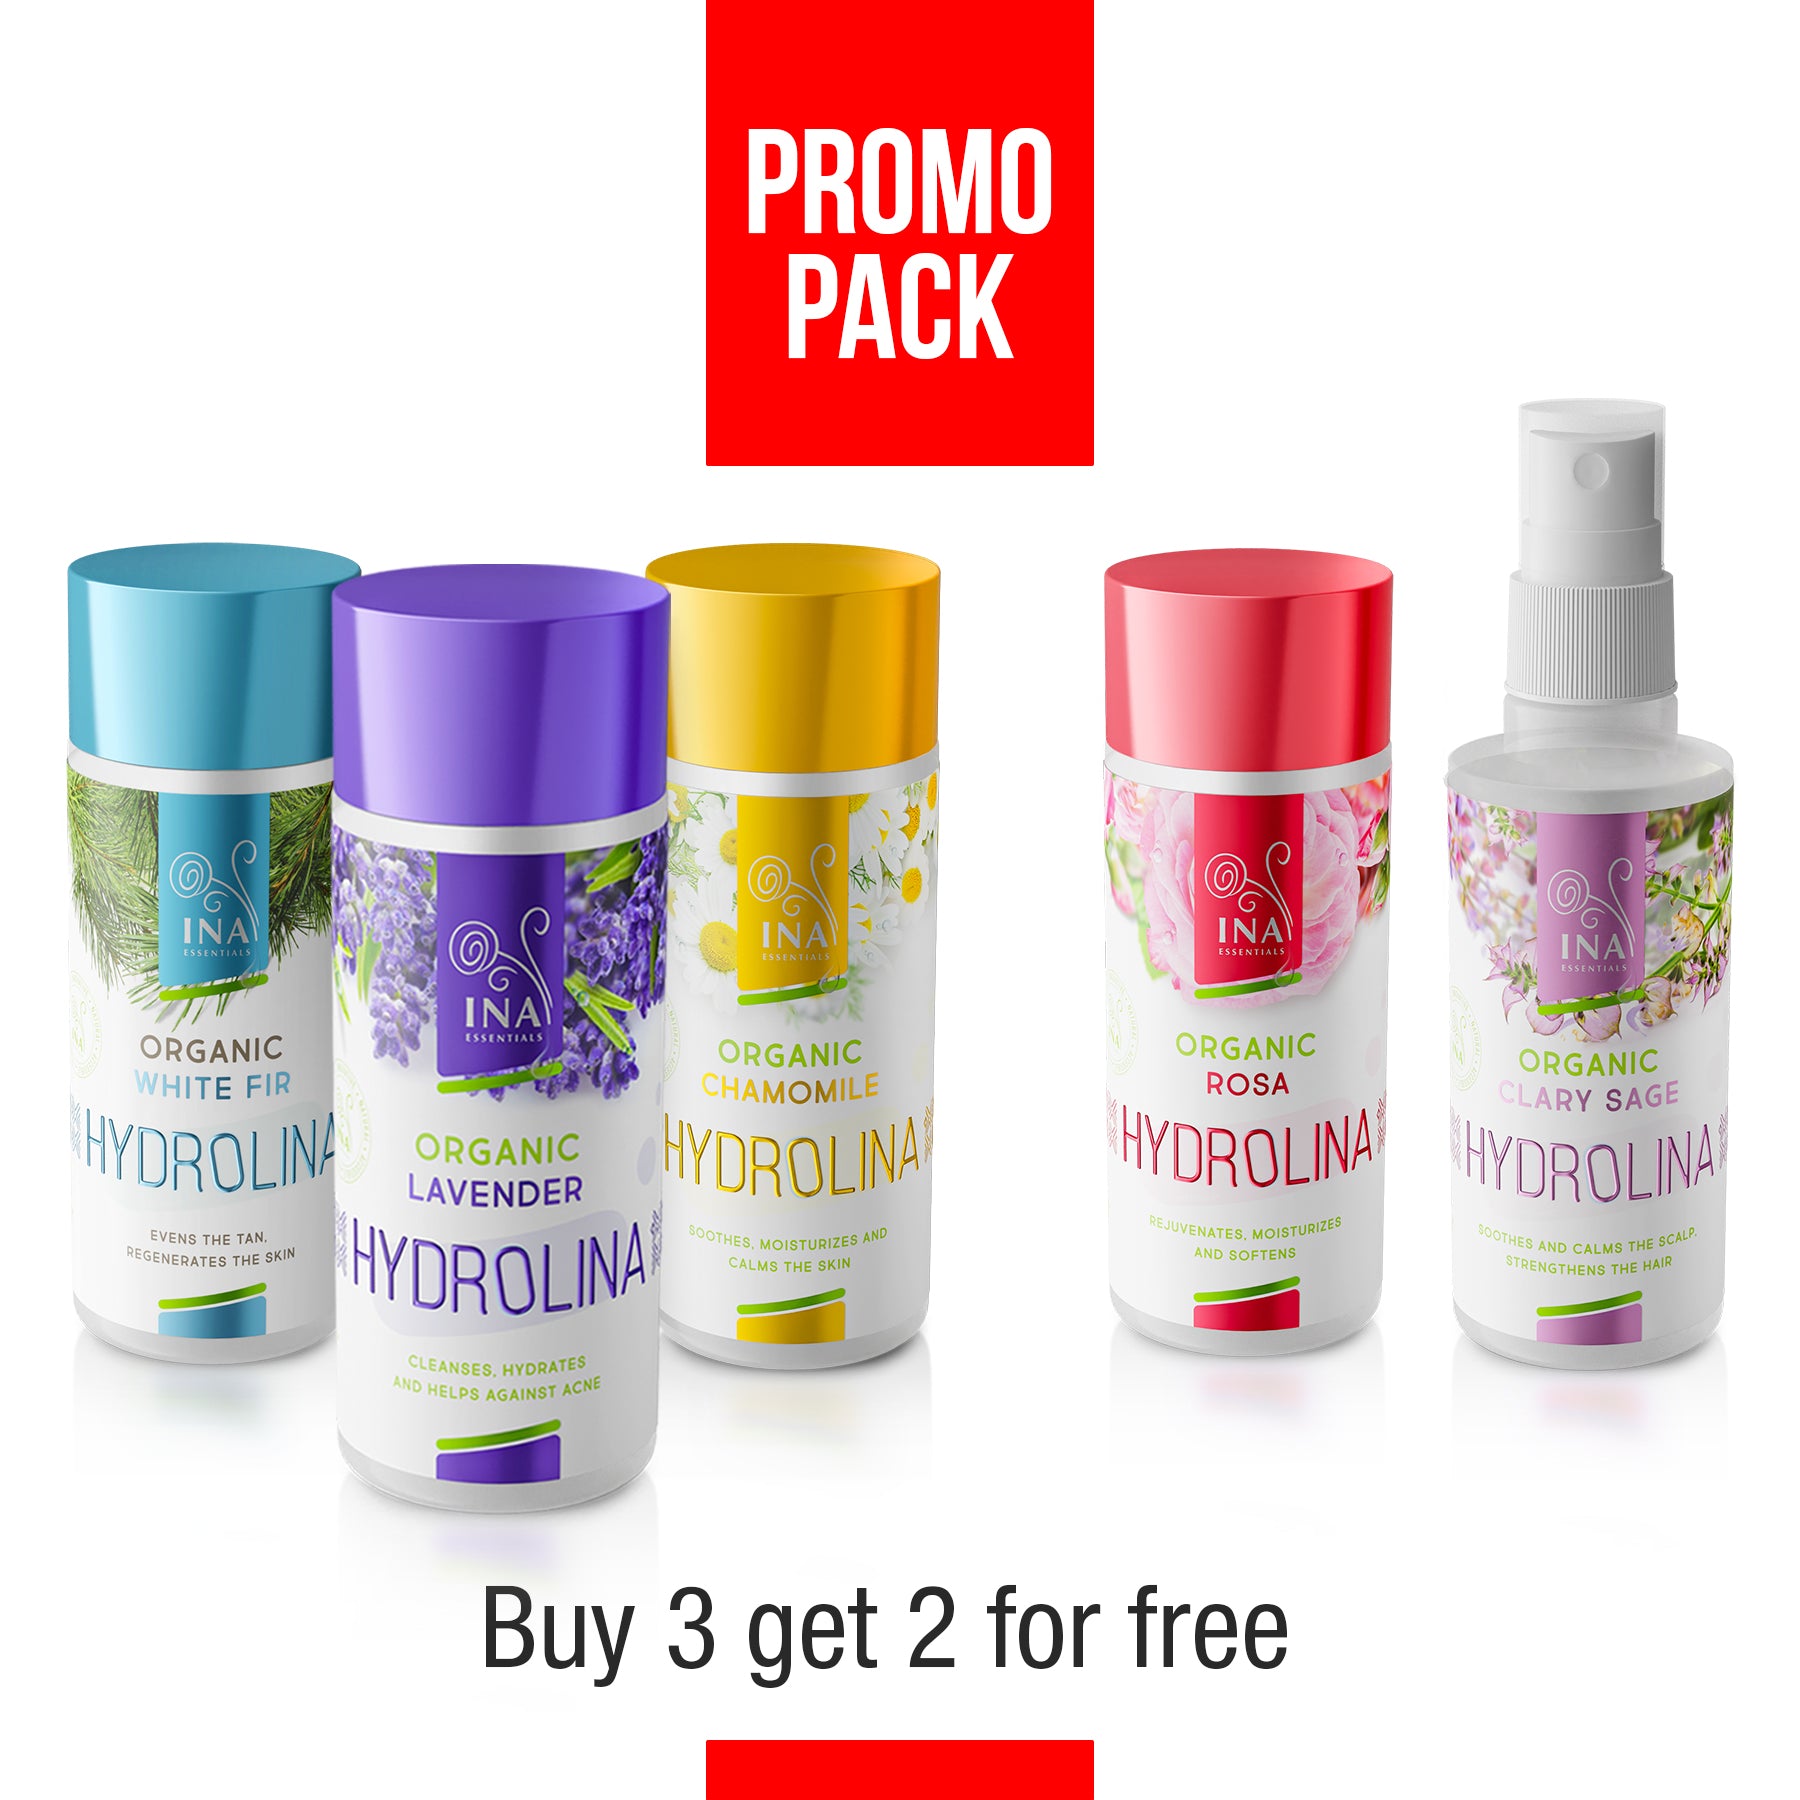 InaЕssentials Promo Pack - Buy 3, GET 2 FREE + FREE SHIPPING